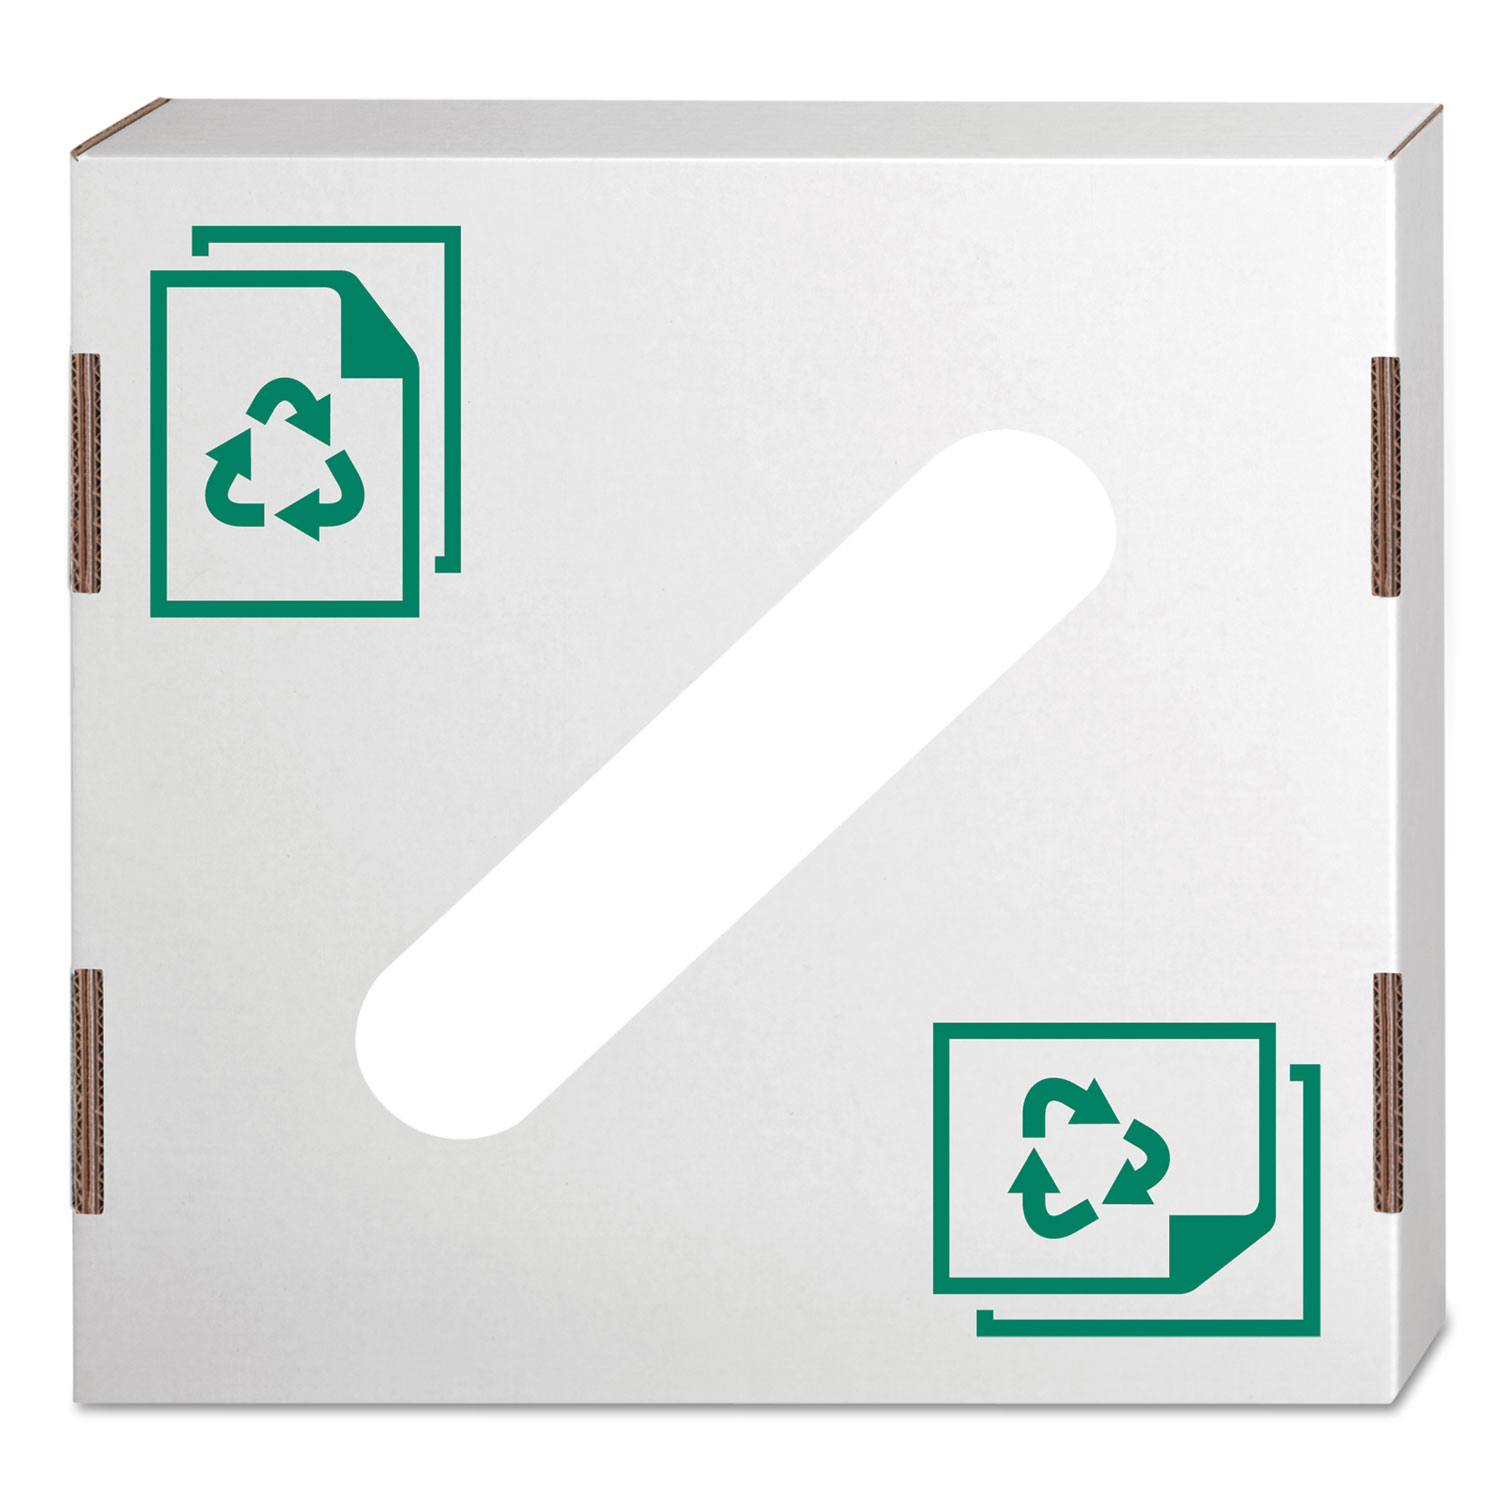  Bankers Box 7320301 Waste and Recycling Bin Lid, Paper, White/Green Print, 10/Carton (FEL7320301) 